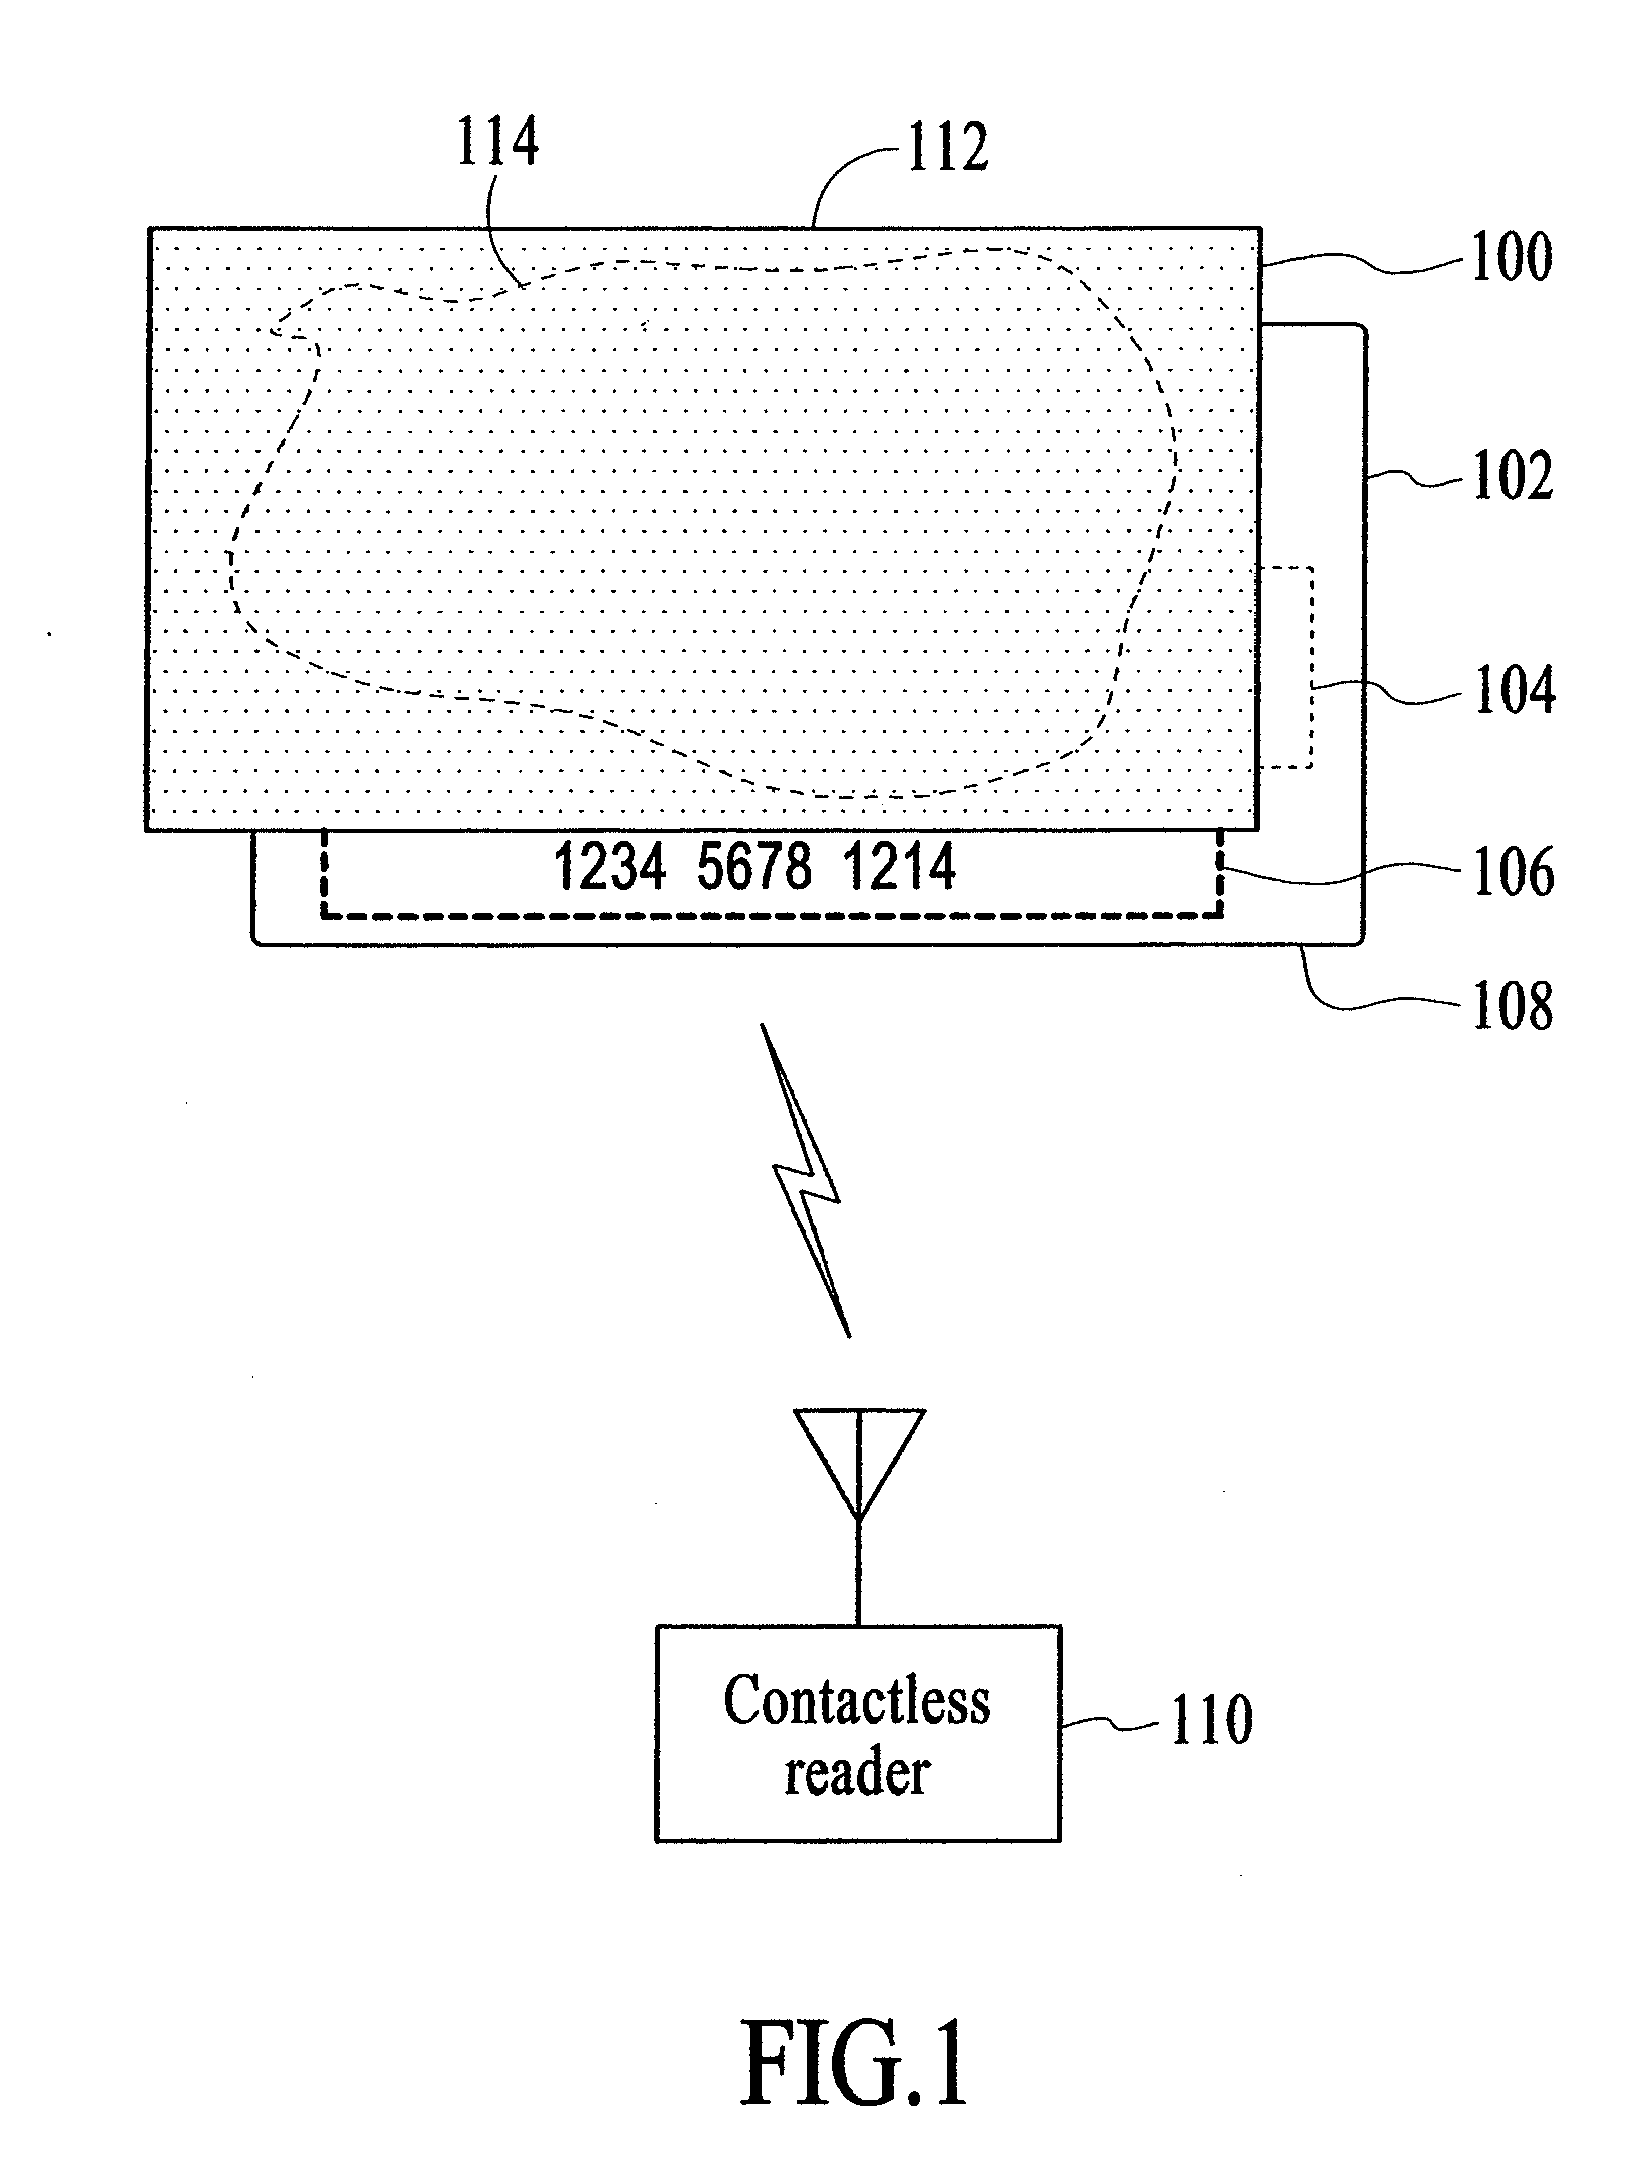 Apparatus and method to electromagnetically shield portable consumer devices